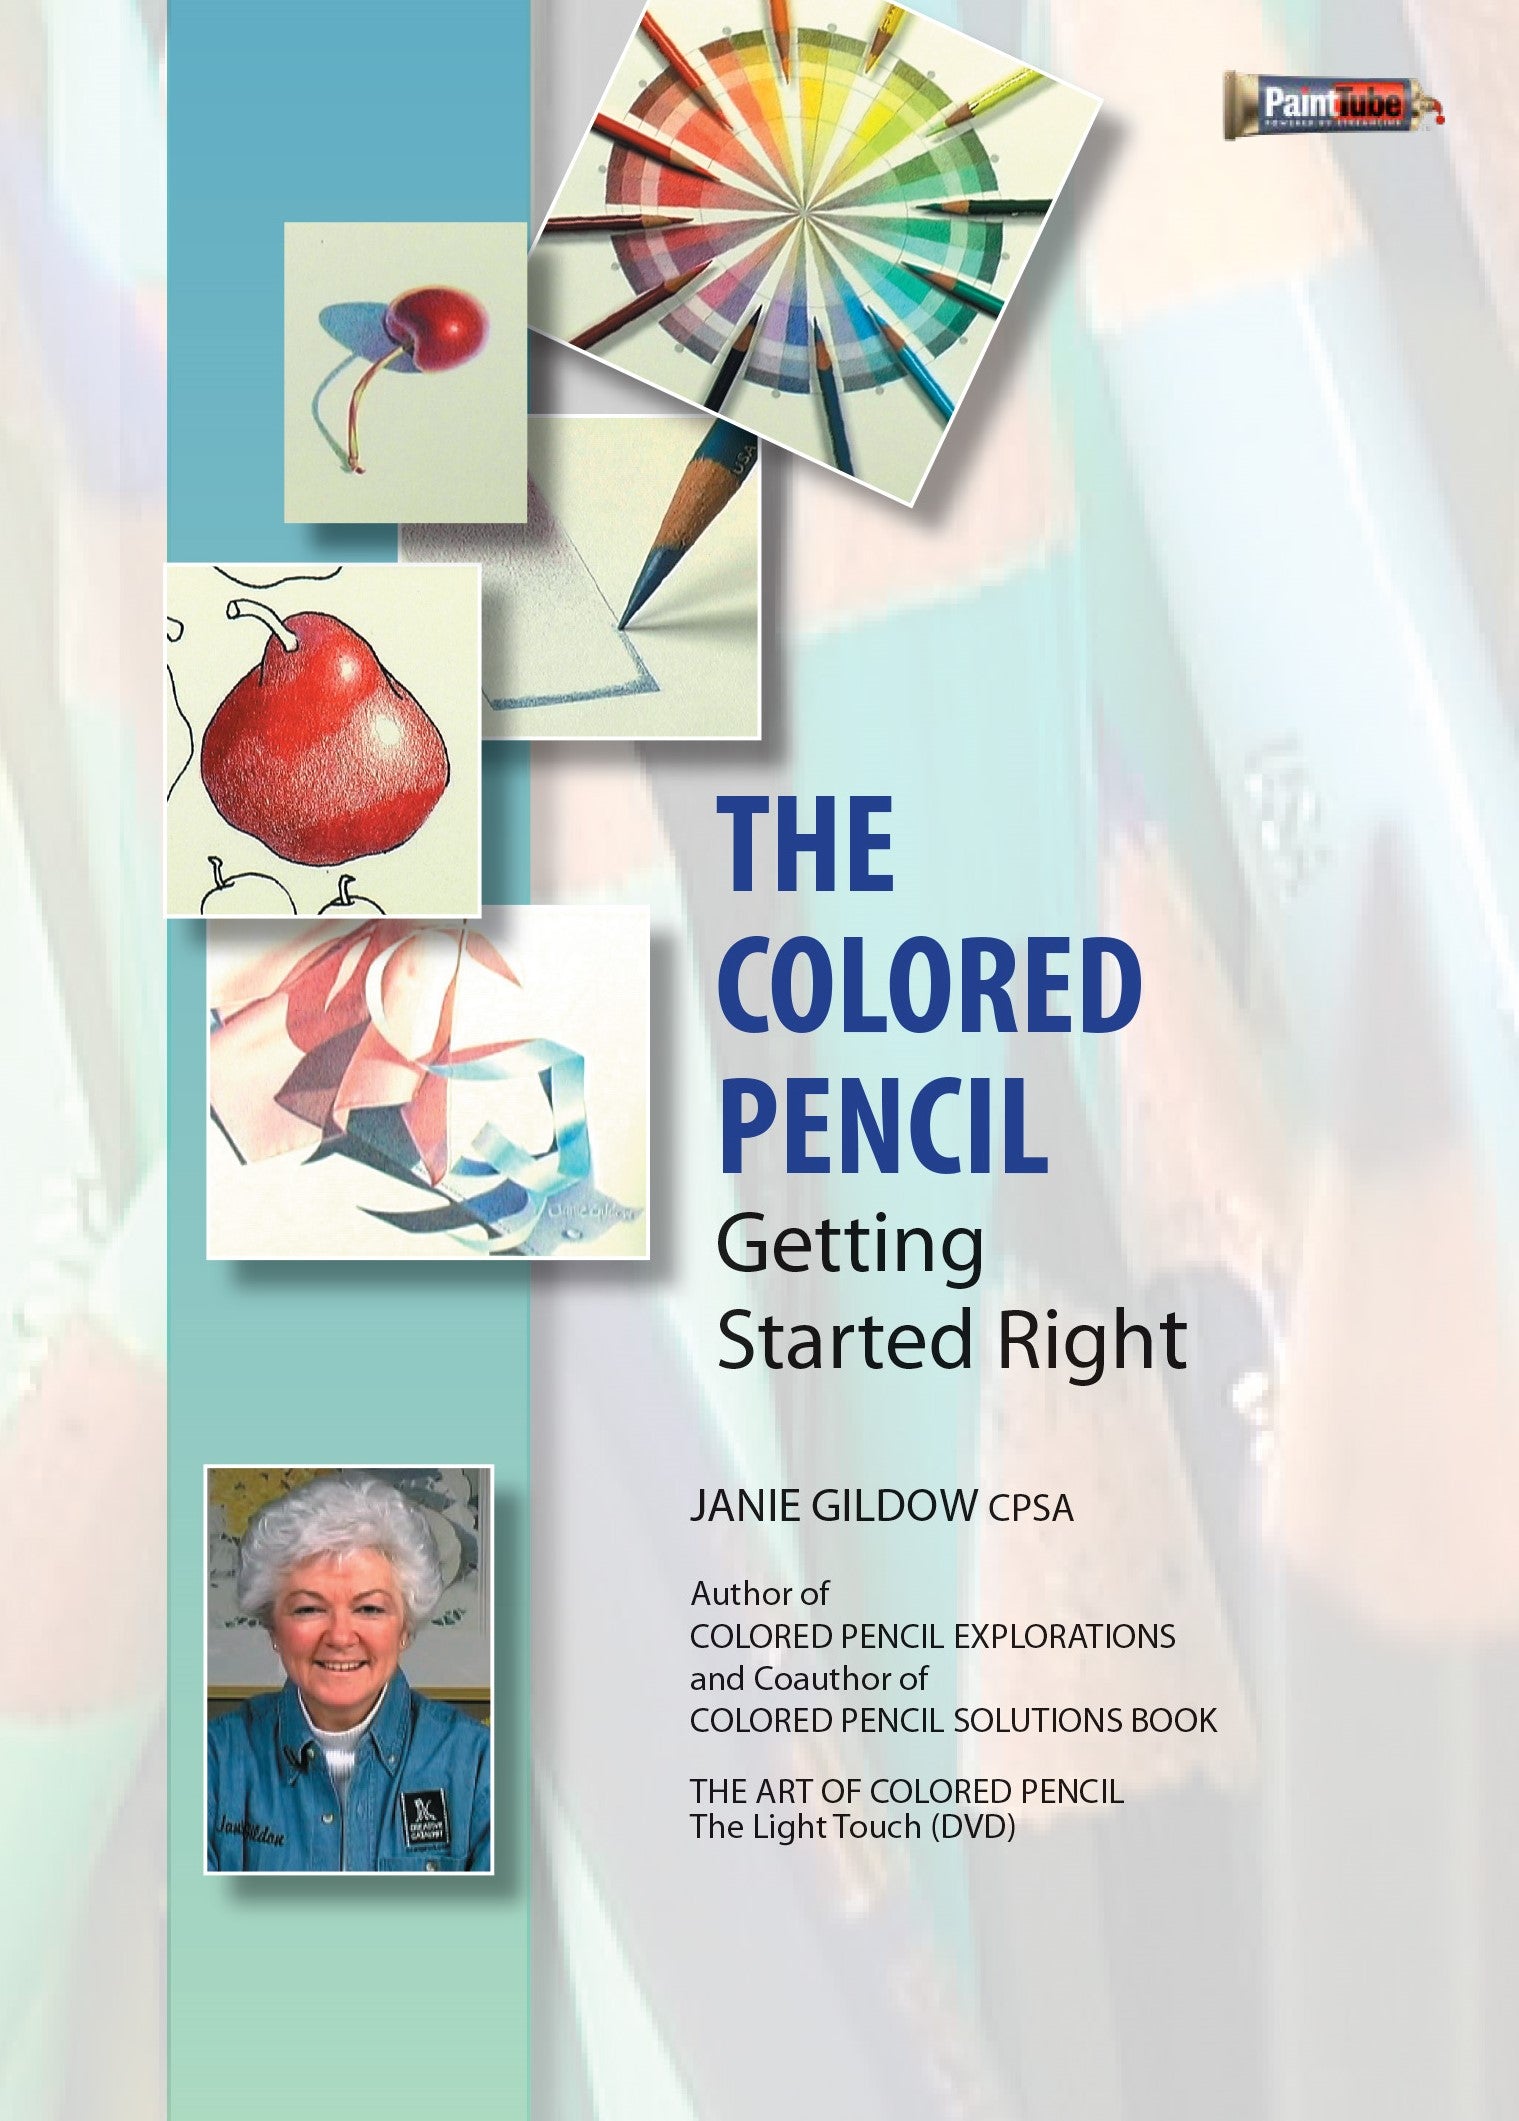 Janie Gildow: The Colored Pencil - Getting Started Right